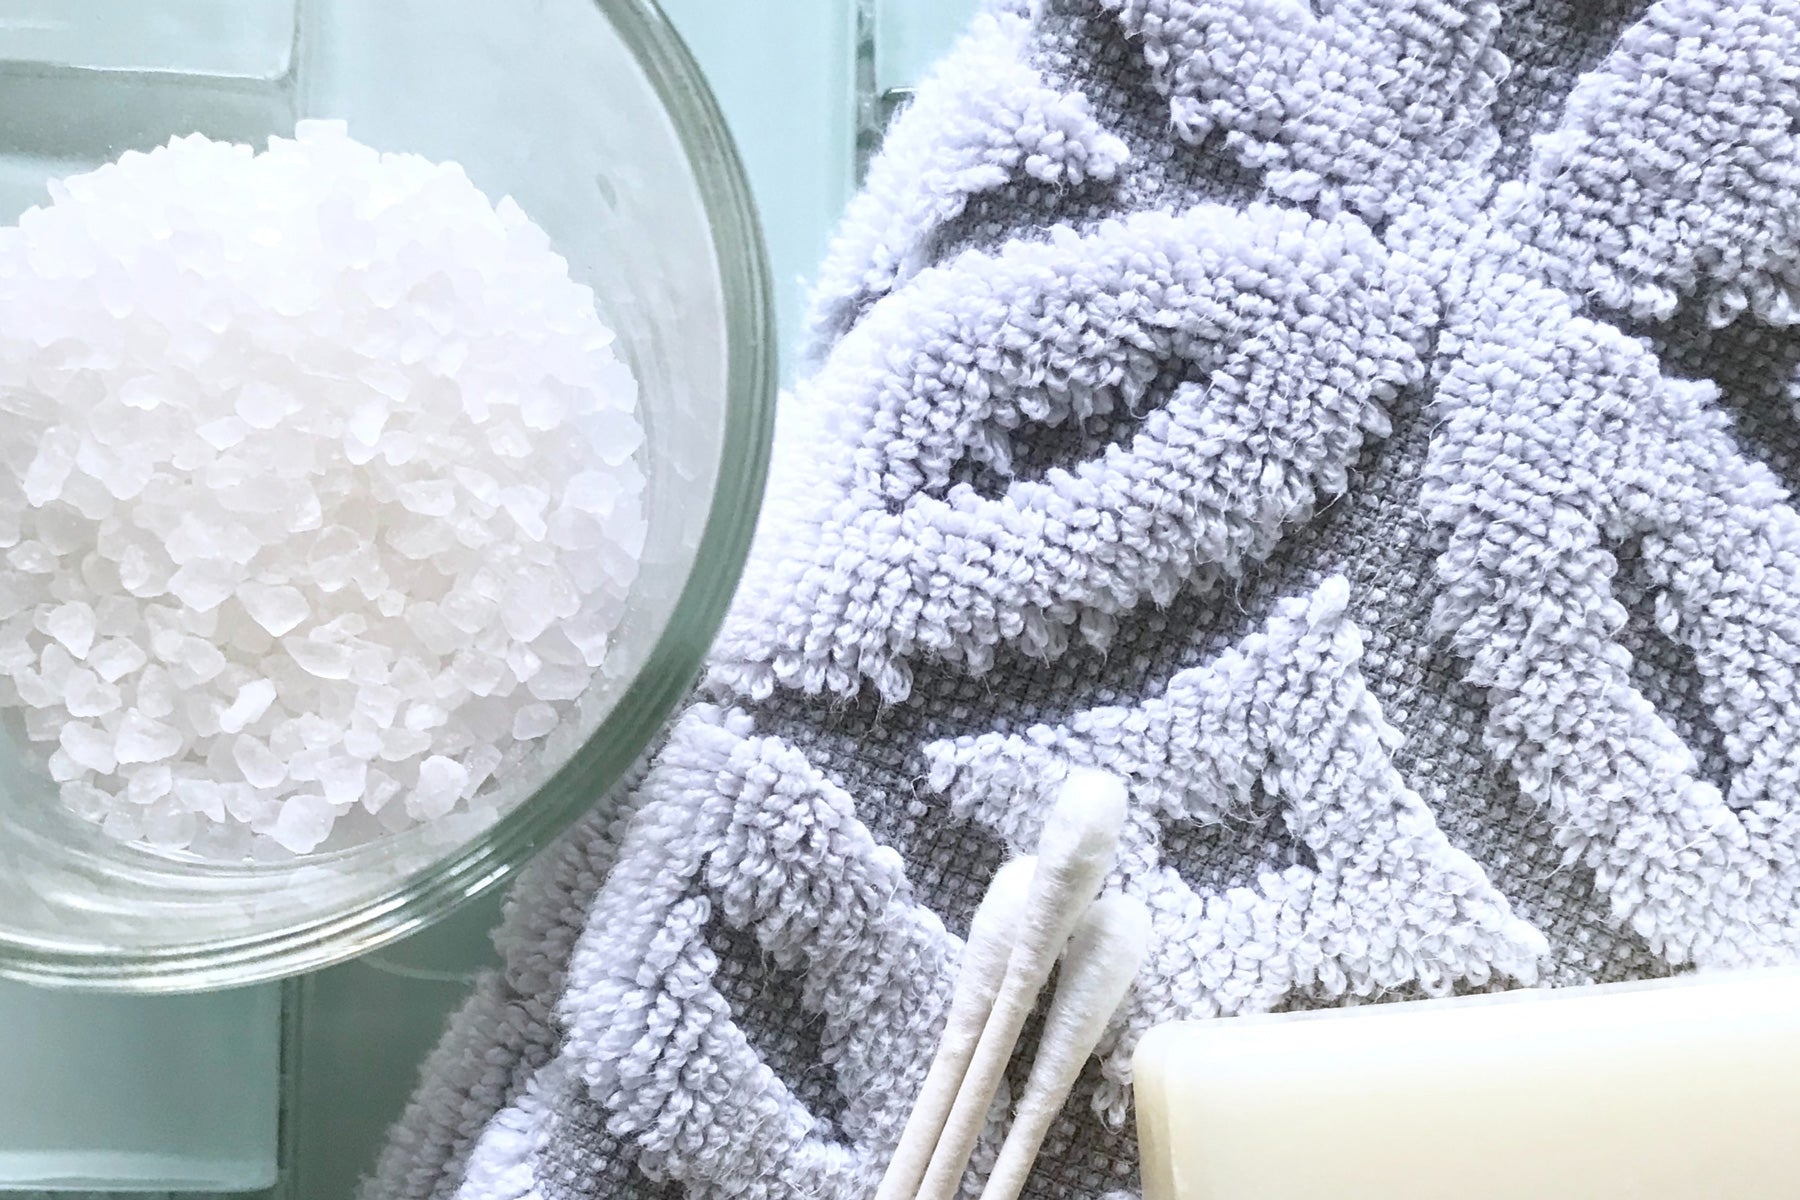 Is Salt Therapy The Secret To Relieving Your Winter Woes?